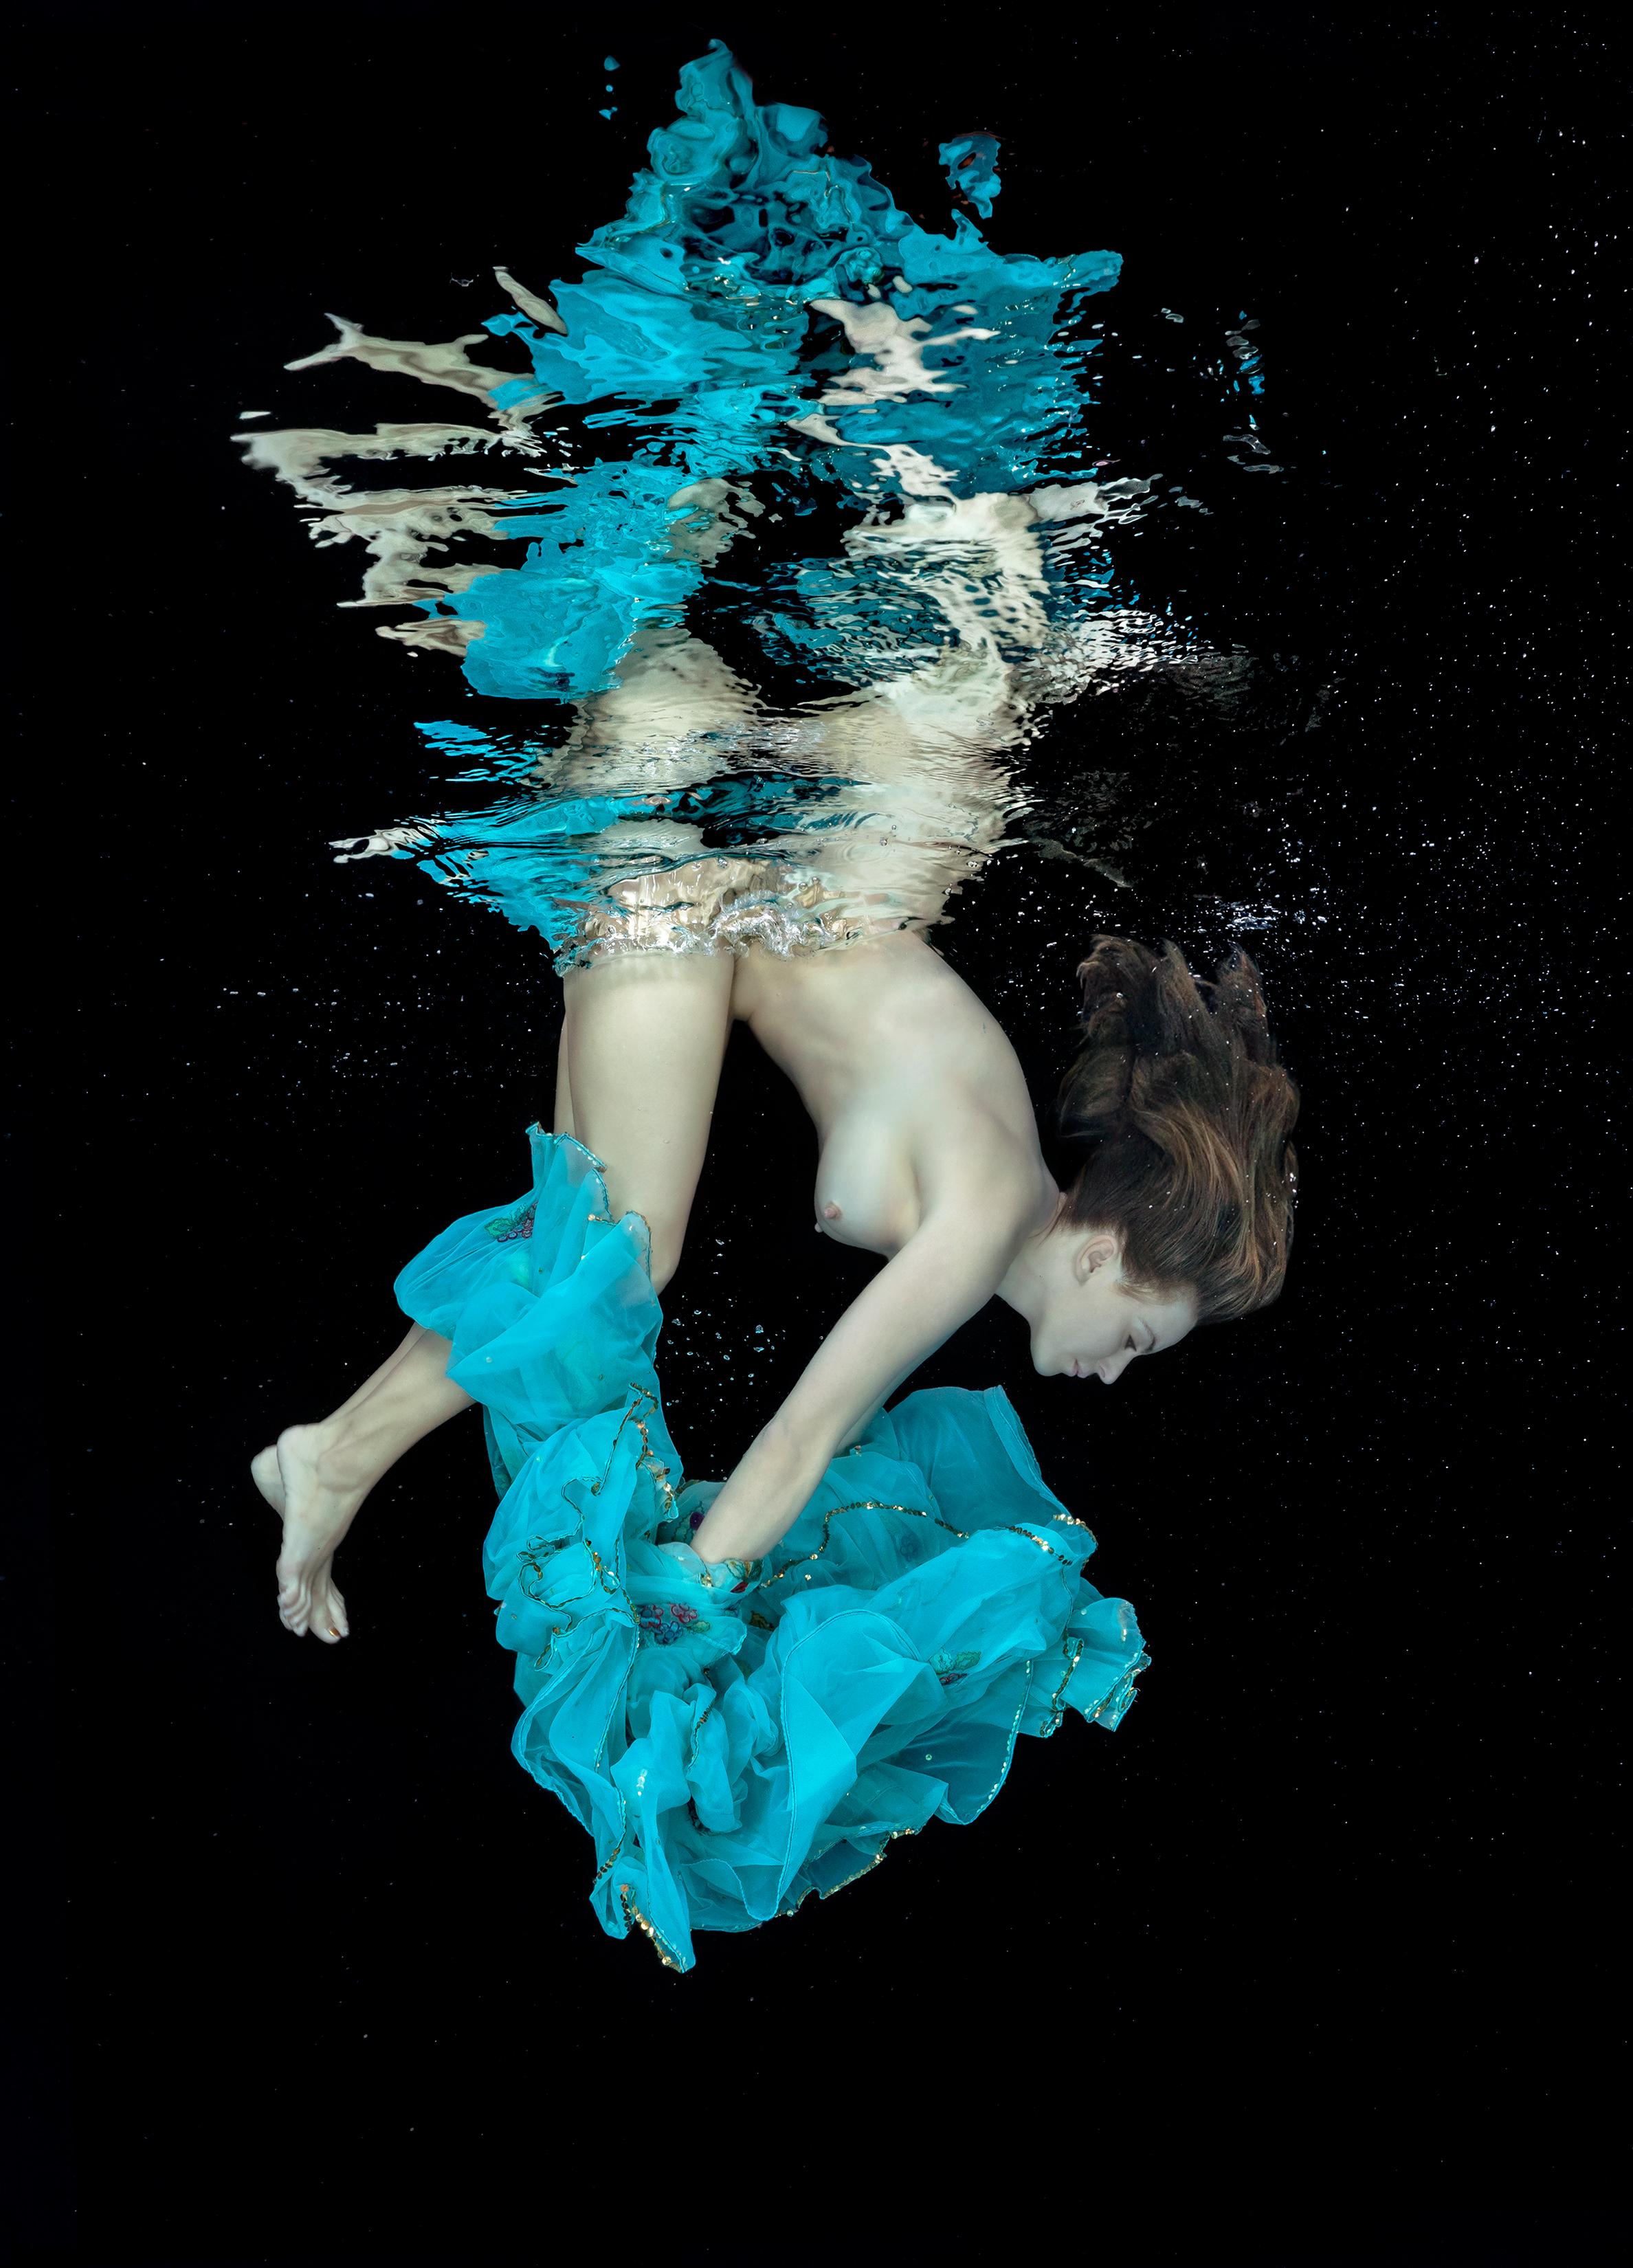 Alex Sher Nude Photograph - Porcelain and Тurquoise - underwater nude photograph - archival pigment 35x26"